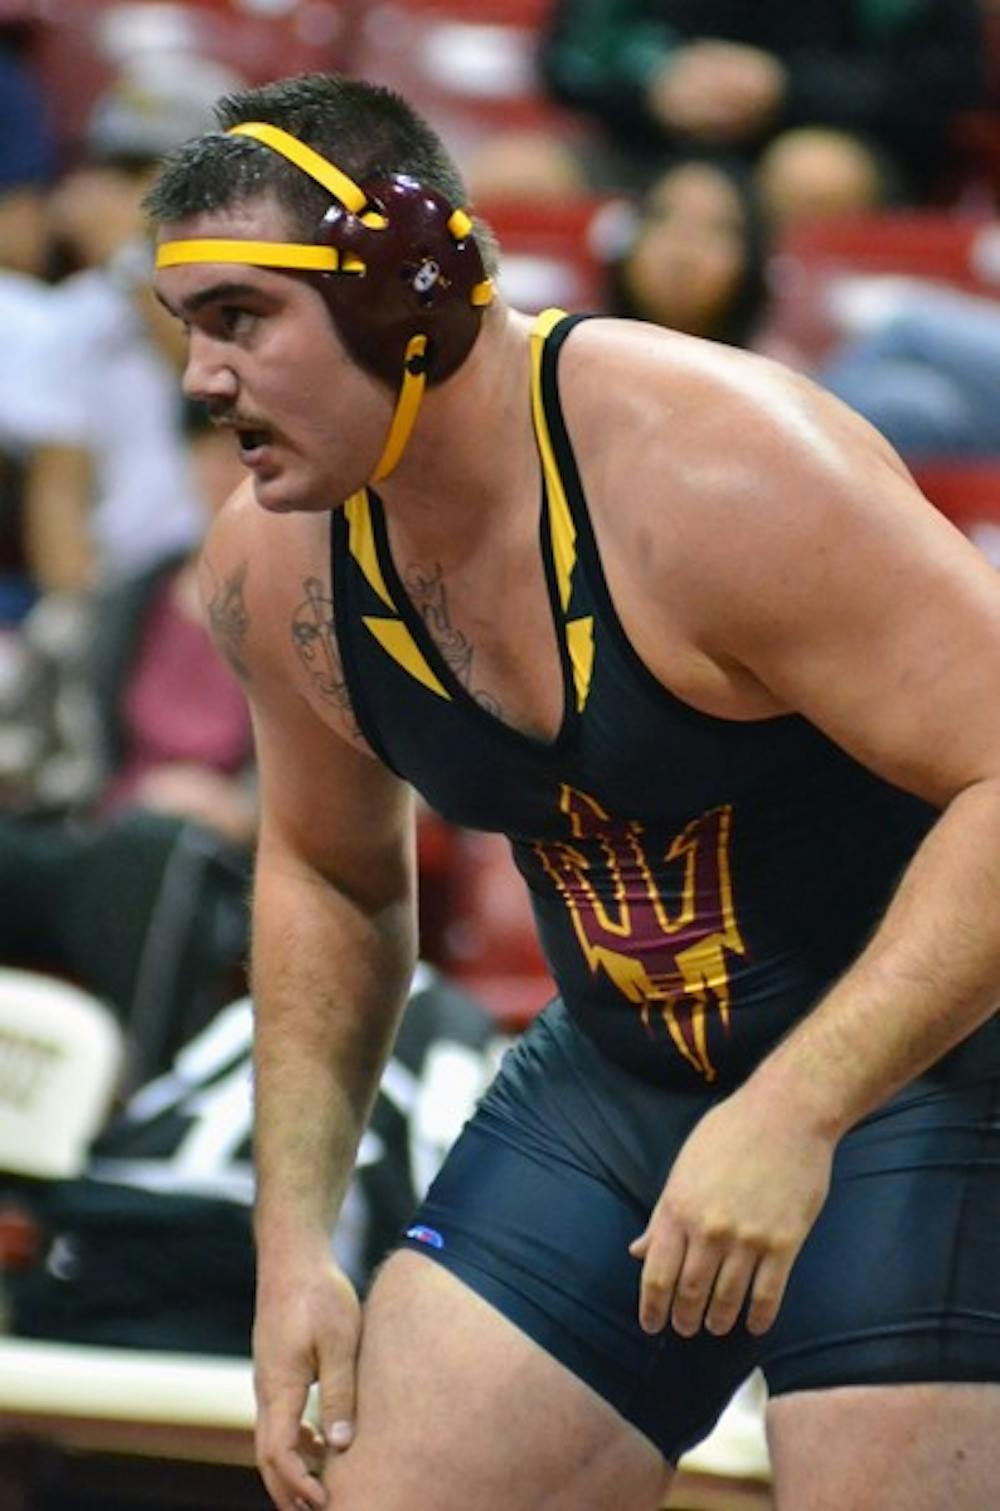 ASU redshirt junior heavyweight Levi Cooper stares down his opponent during the Sun Devils’ meet against GCU and Embry-Riddle on Nov. 13. Cooper was the only wrestler to place for the Sun Devils in the Cliff Keen Las Vegas Invitational over the weekend. (Photo by Aaron Lavinsky)